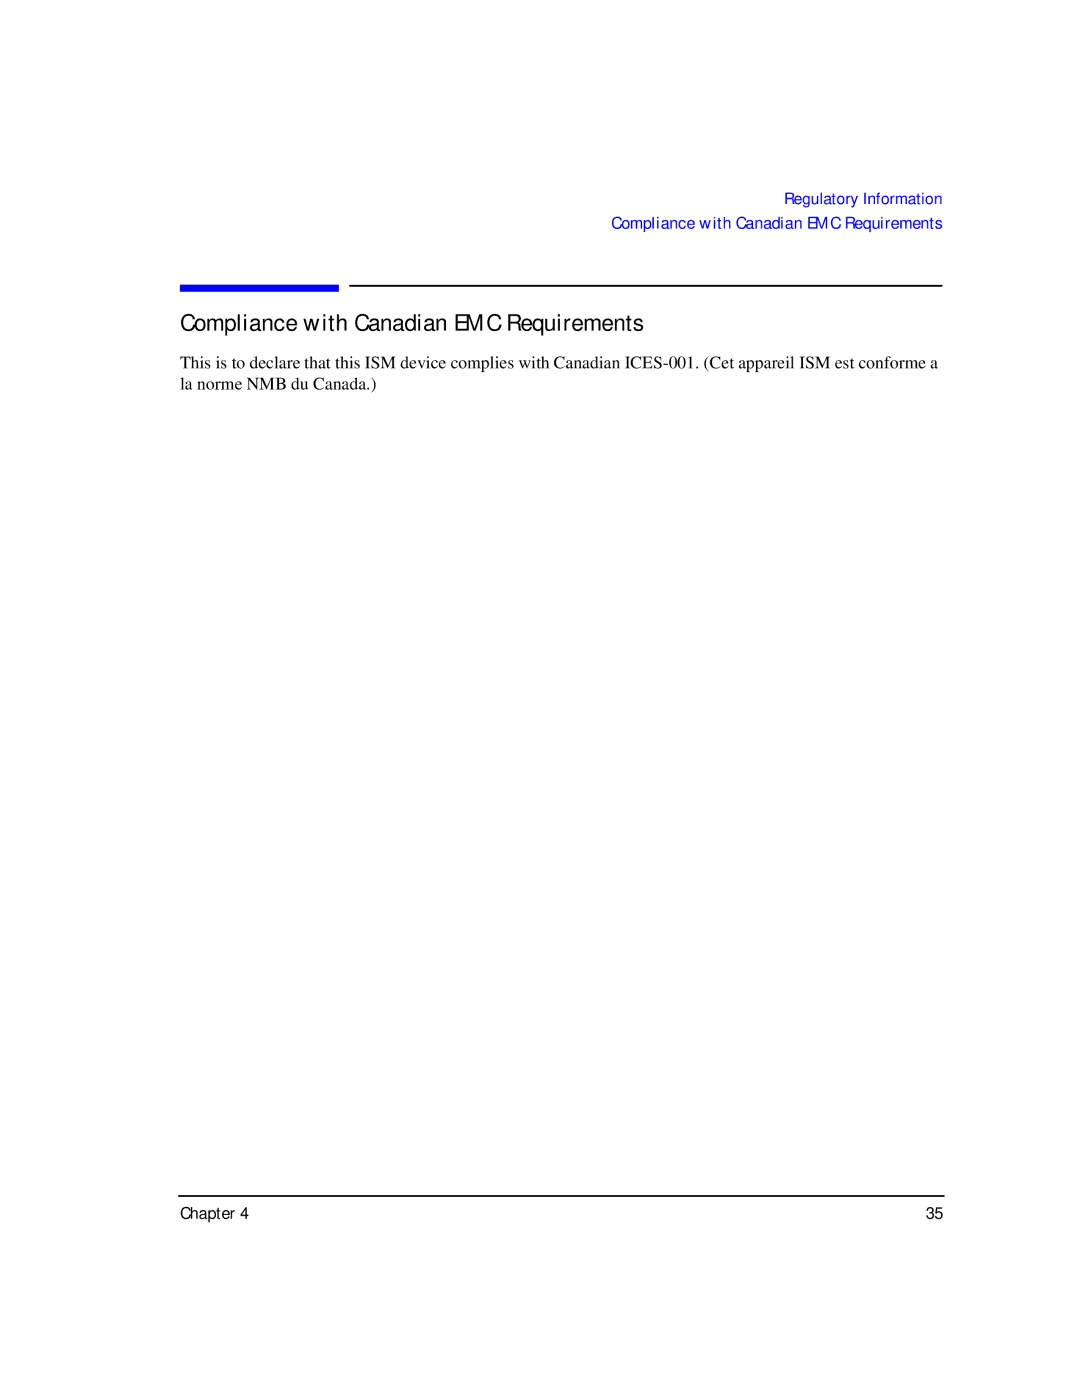 Agilent Technologies E8257D/67D manual Compliance with Canadian EMC Requirements, Chapter 